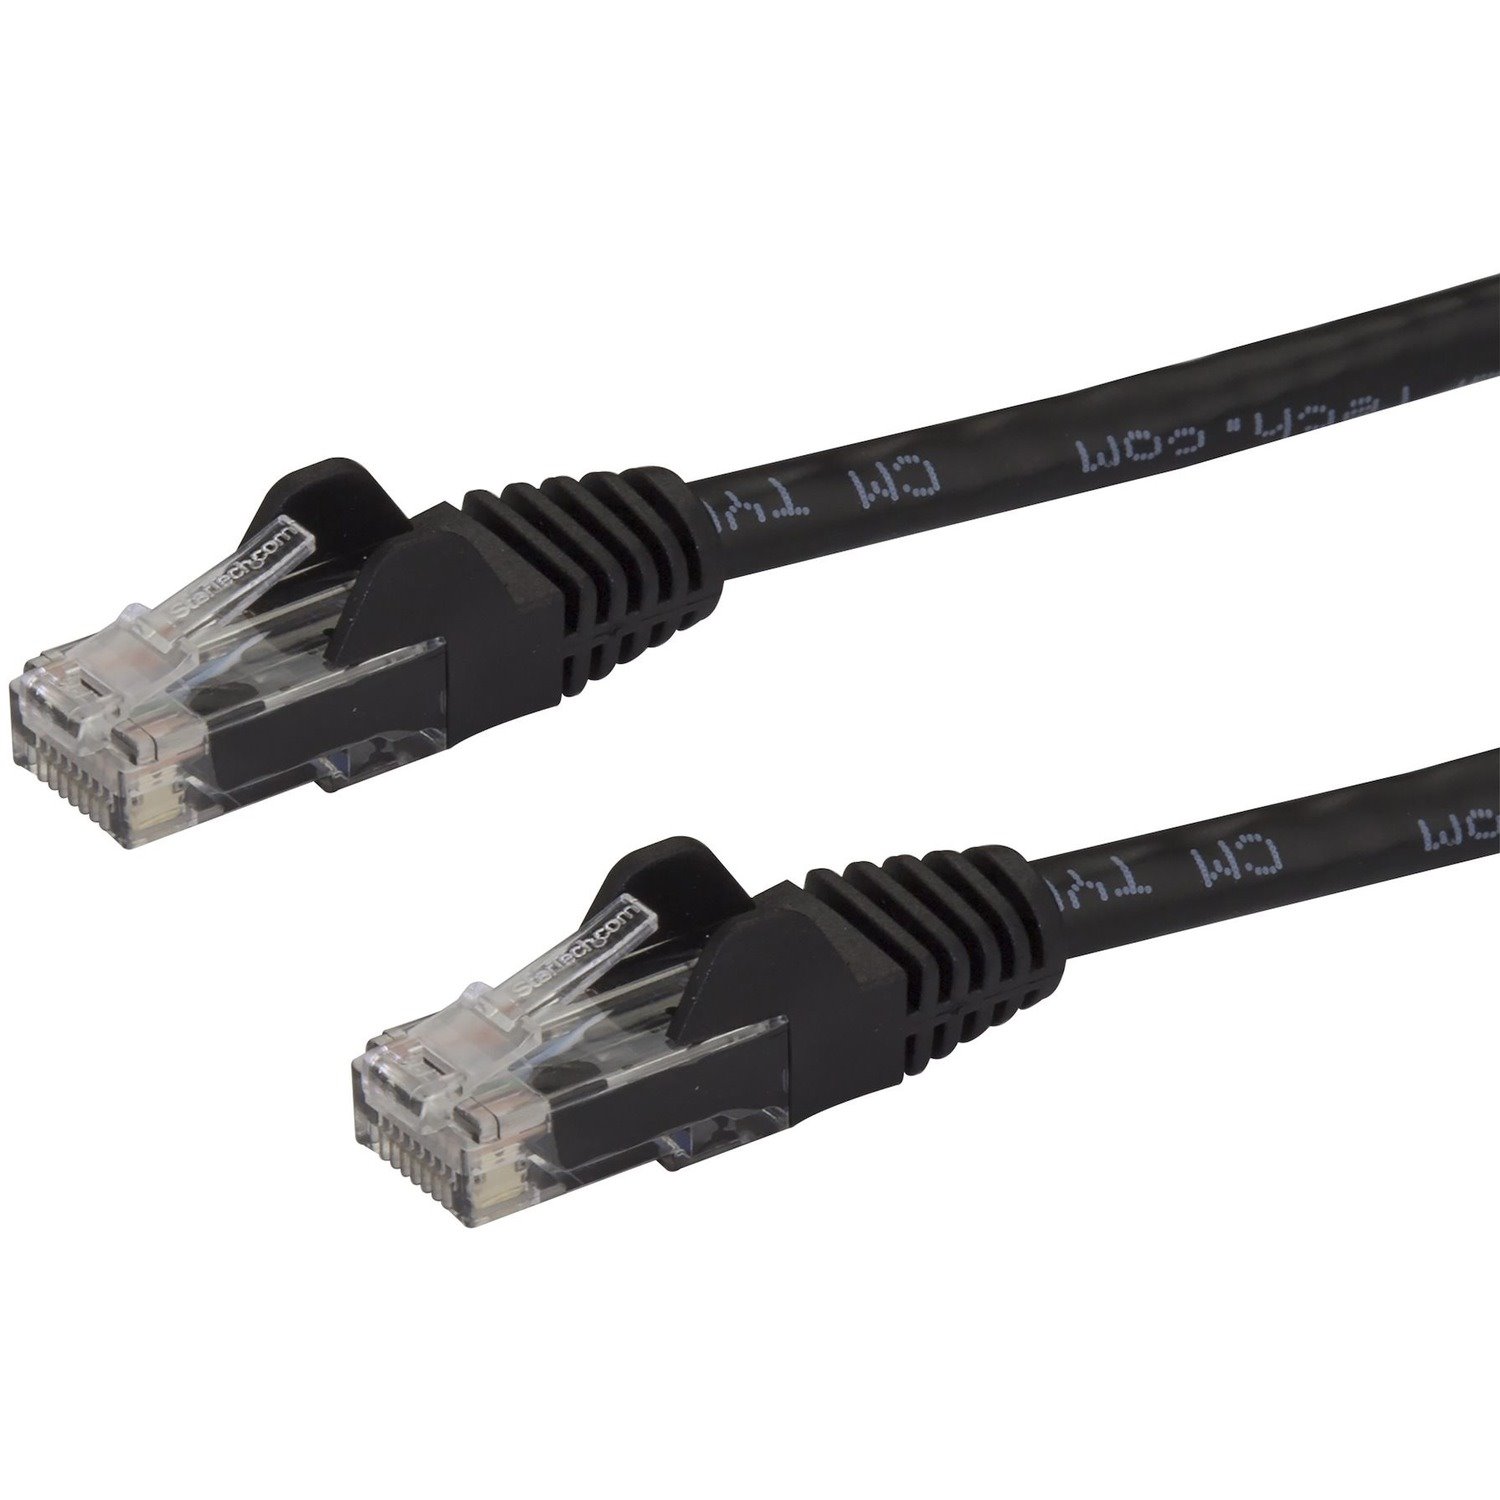 StarTech.com 5 m Category 6 Network Cable for Network Device - 1